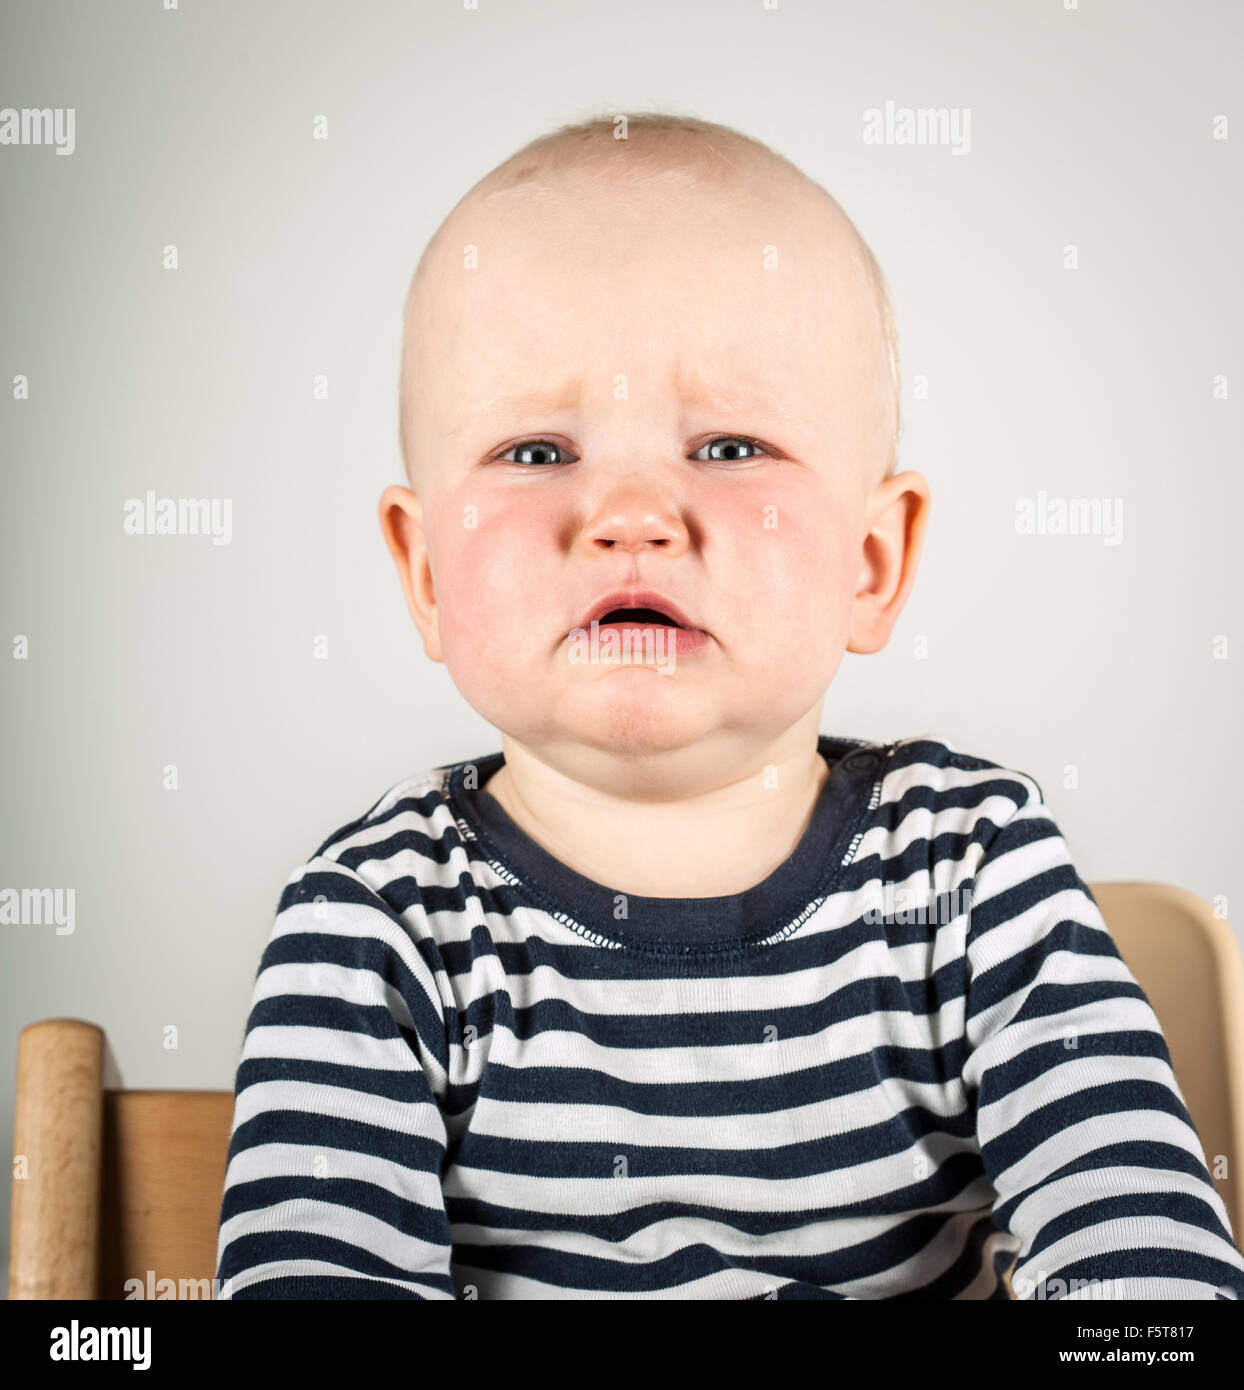 Finland, Portrait of boy (2-3) crying Stock Photo